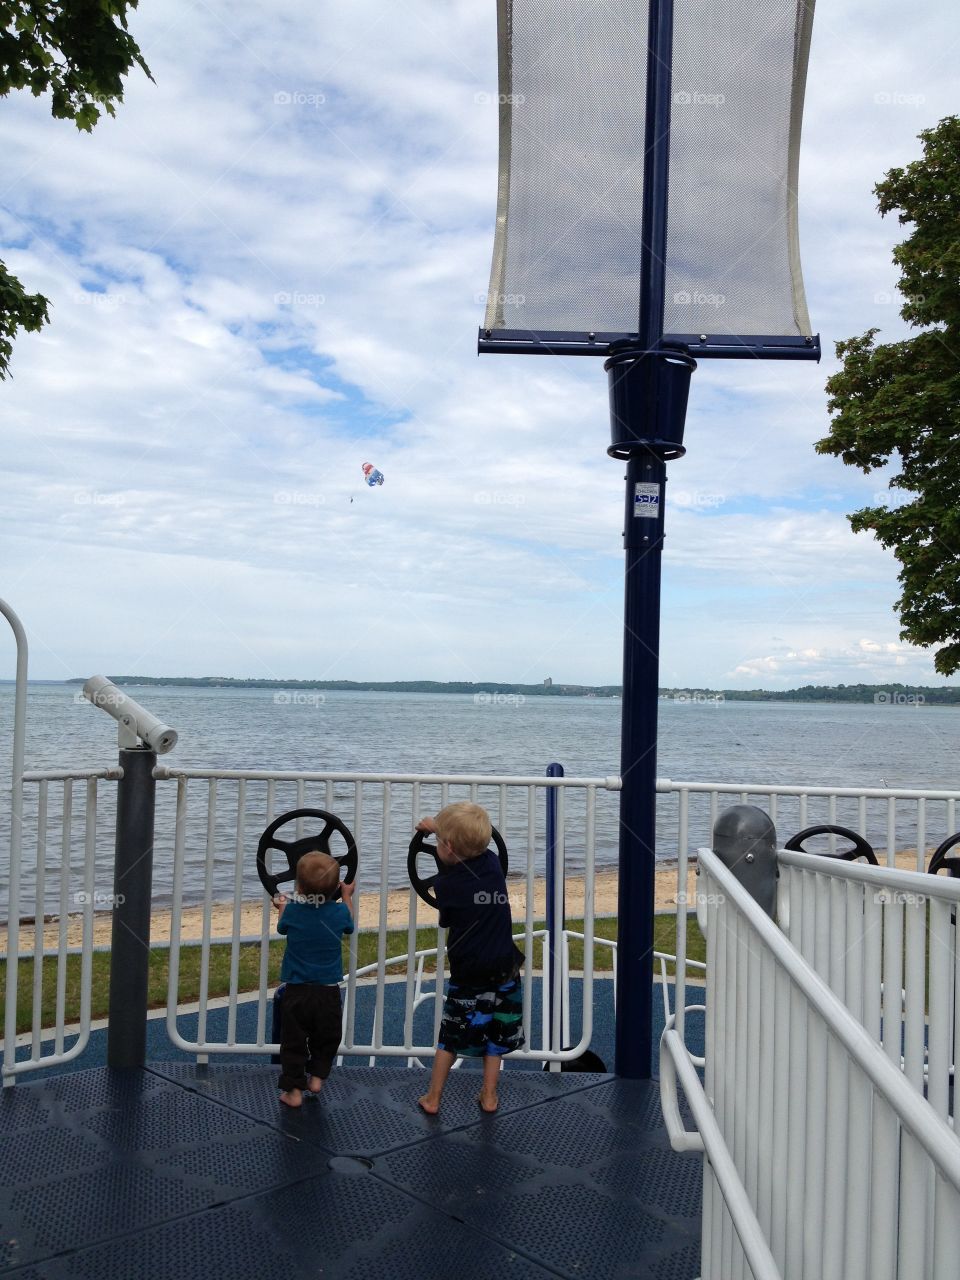 Bayside playground boys. 2 young boys playing on boat play structure overlooking Grand Traverse Bay